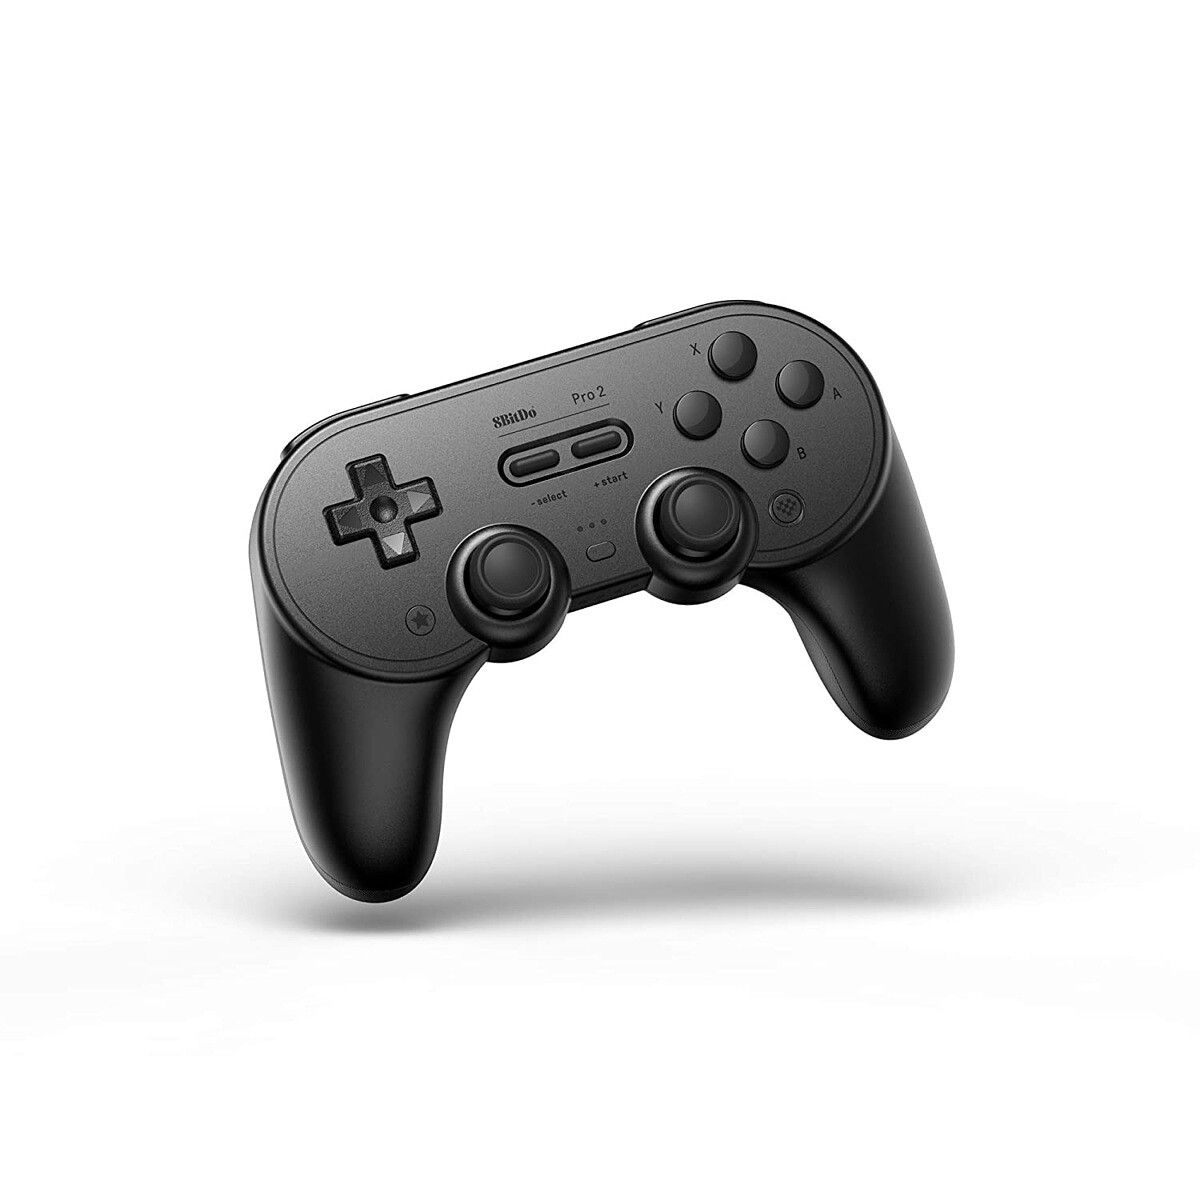 The new 8BitDo Pro 2 Bluetooth controller features a new design and can be customized through a mobile app.